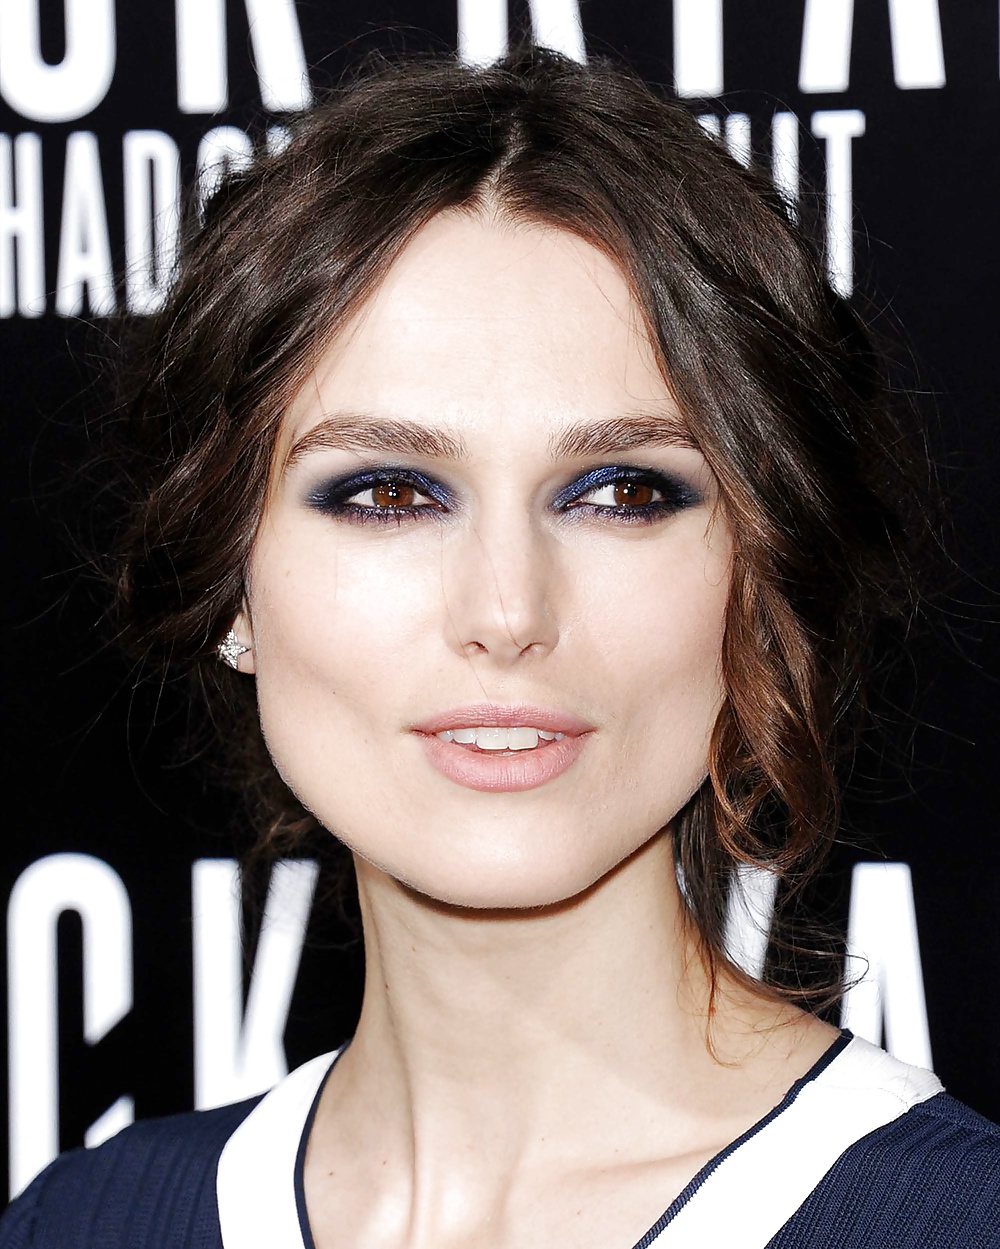 Keira Knightley The Royal Lady of England #35649578